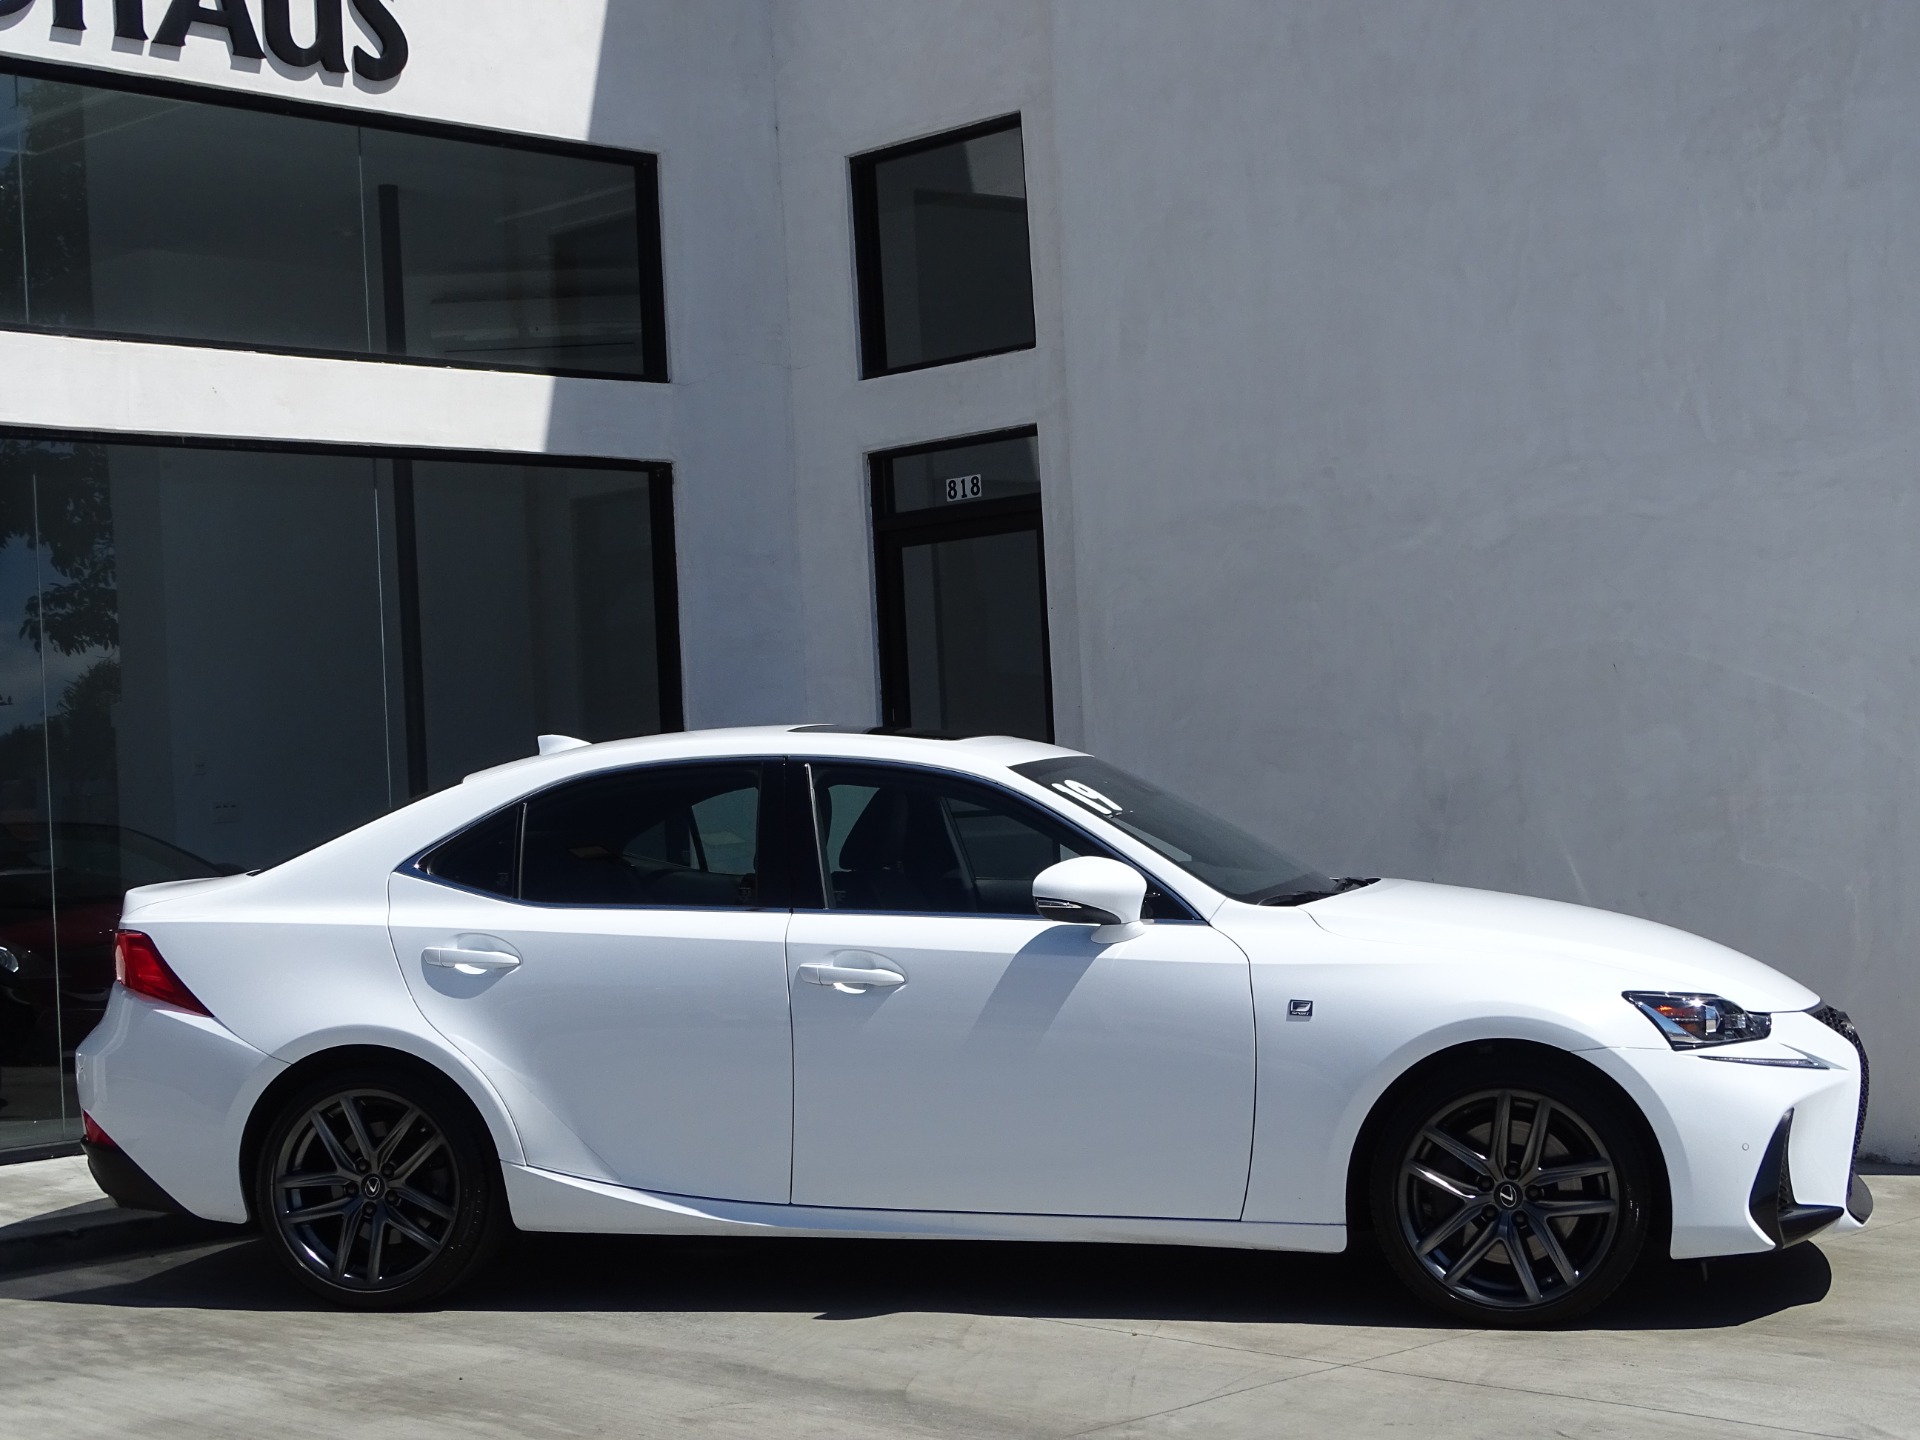 Buying or leasing a new or used volvo in the hudson valley area has never been easier. 2019 Lexus IS 300 Stock # 6461 for sale near Redondo Beach